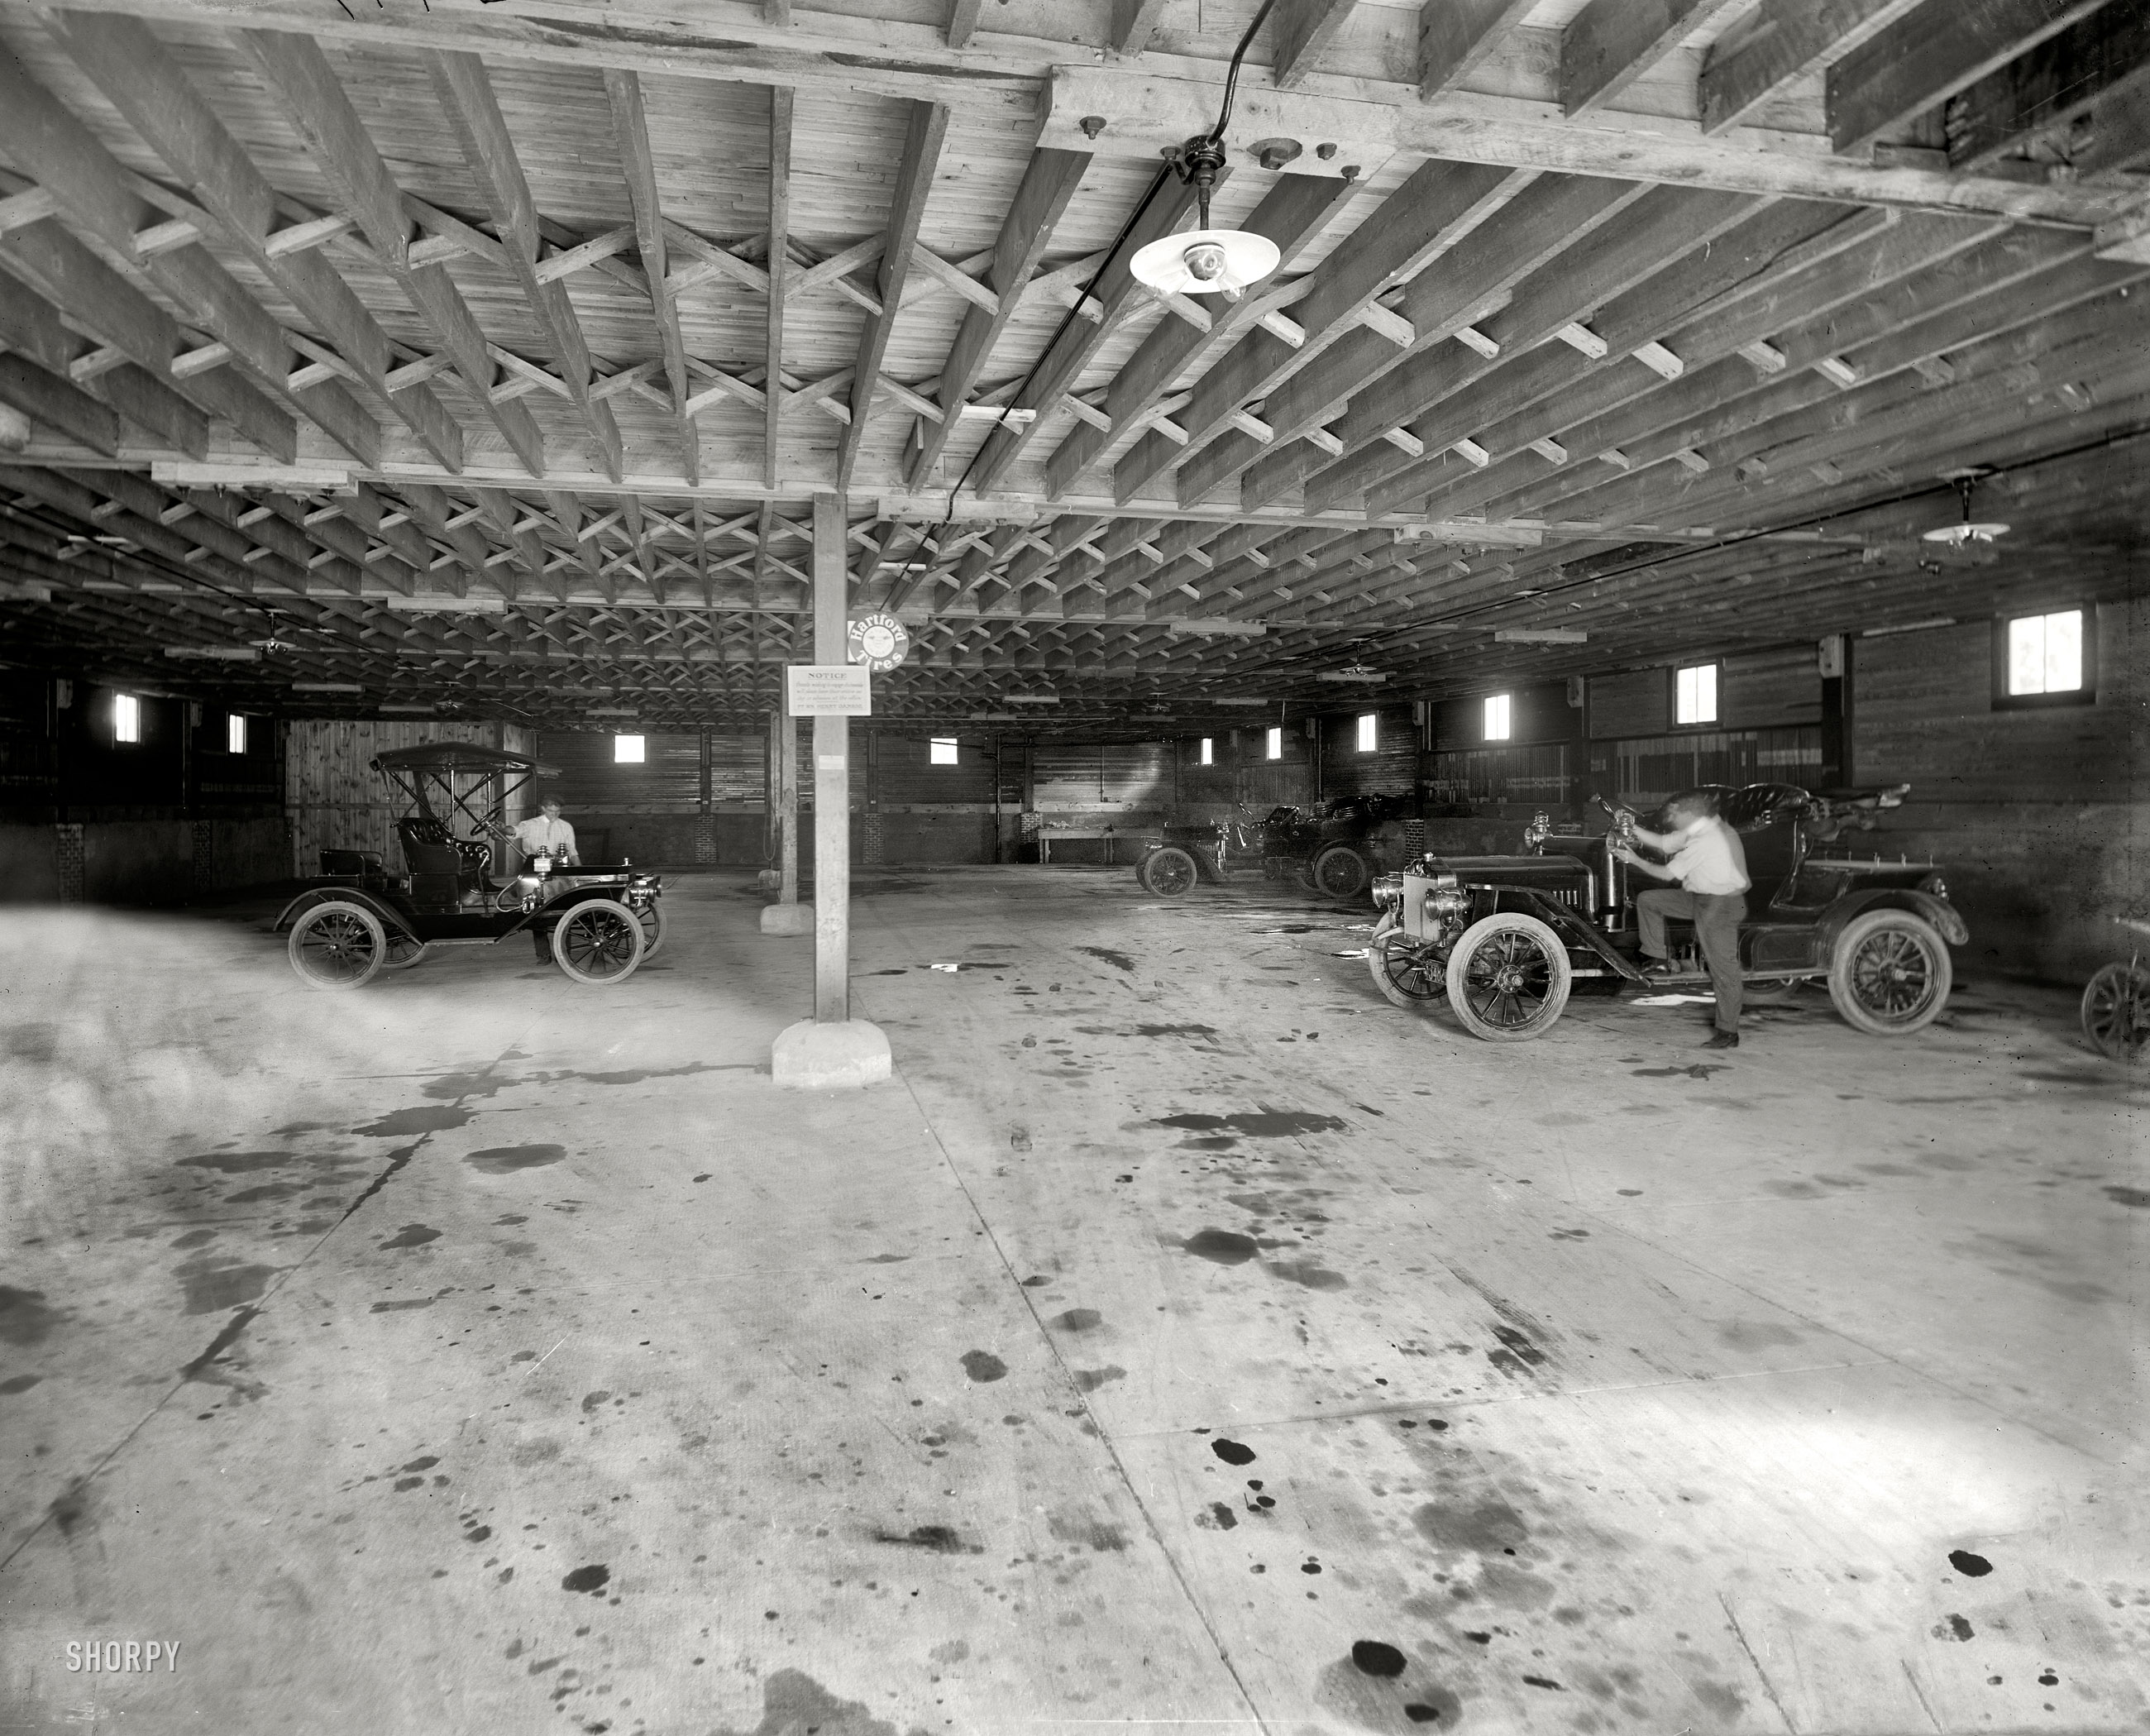 Lake George, New York, circa 1908. "Garage interior, Fort William Henry Hotel." 8x10 inch dry plate glass negative, Detroit Publishing Company. View full size.